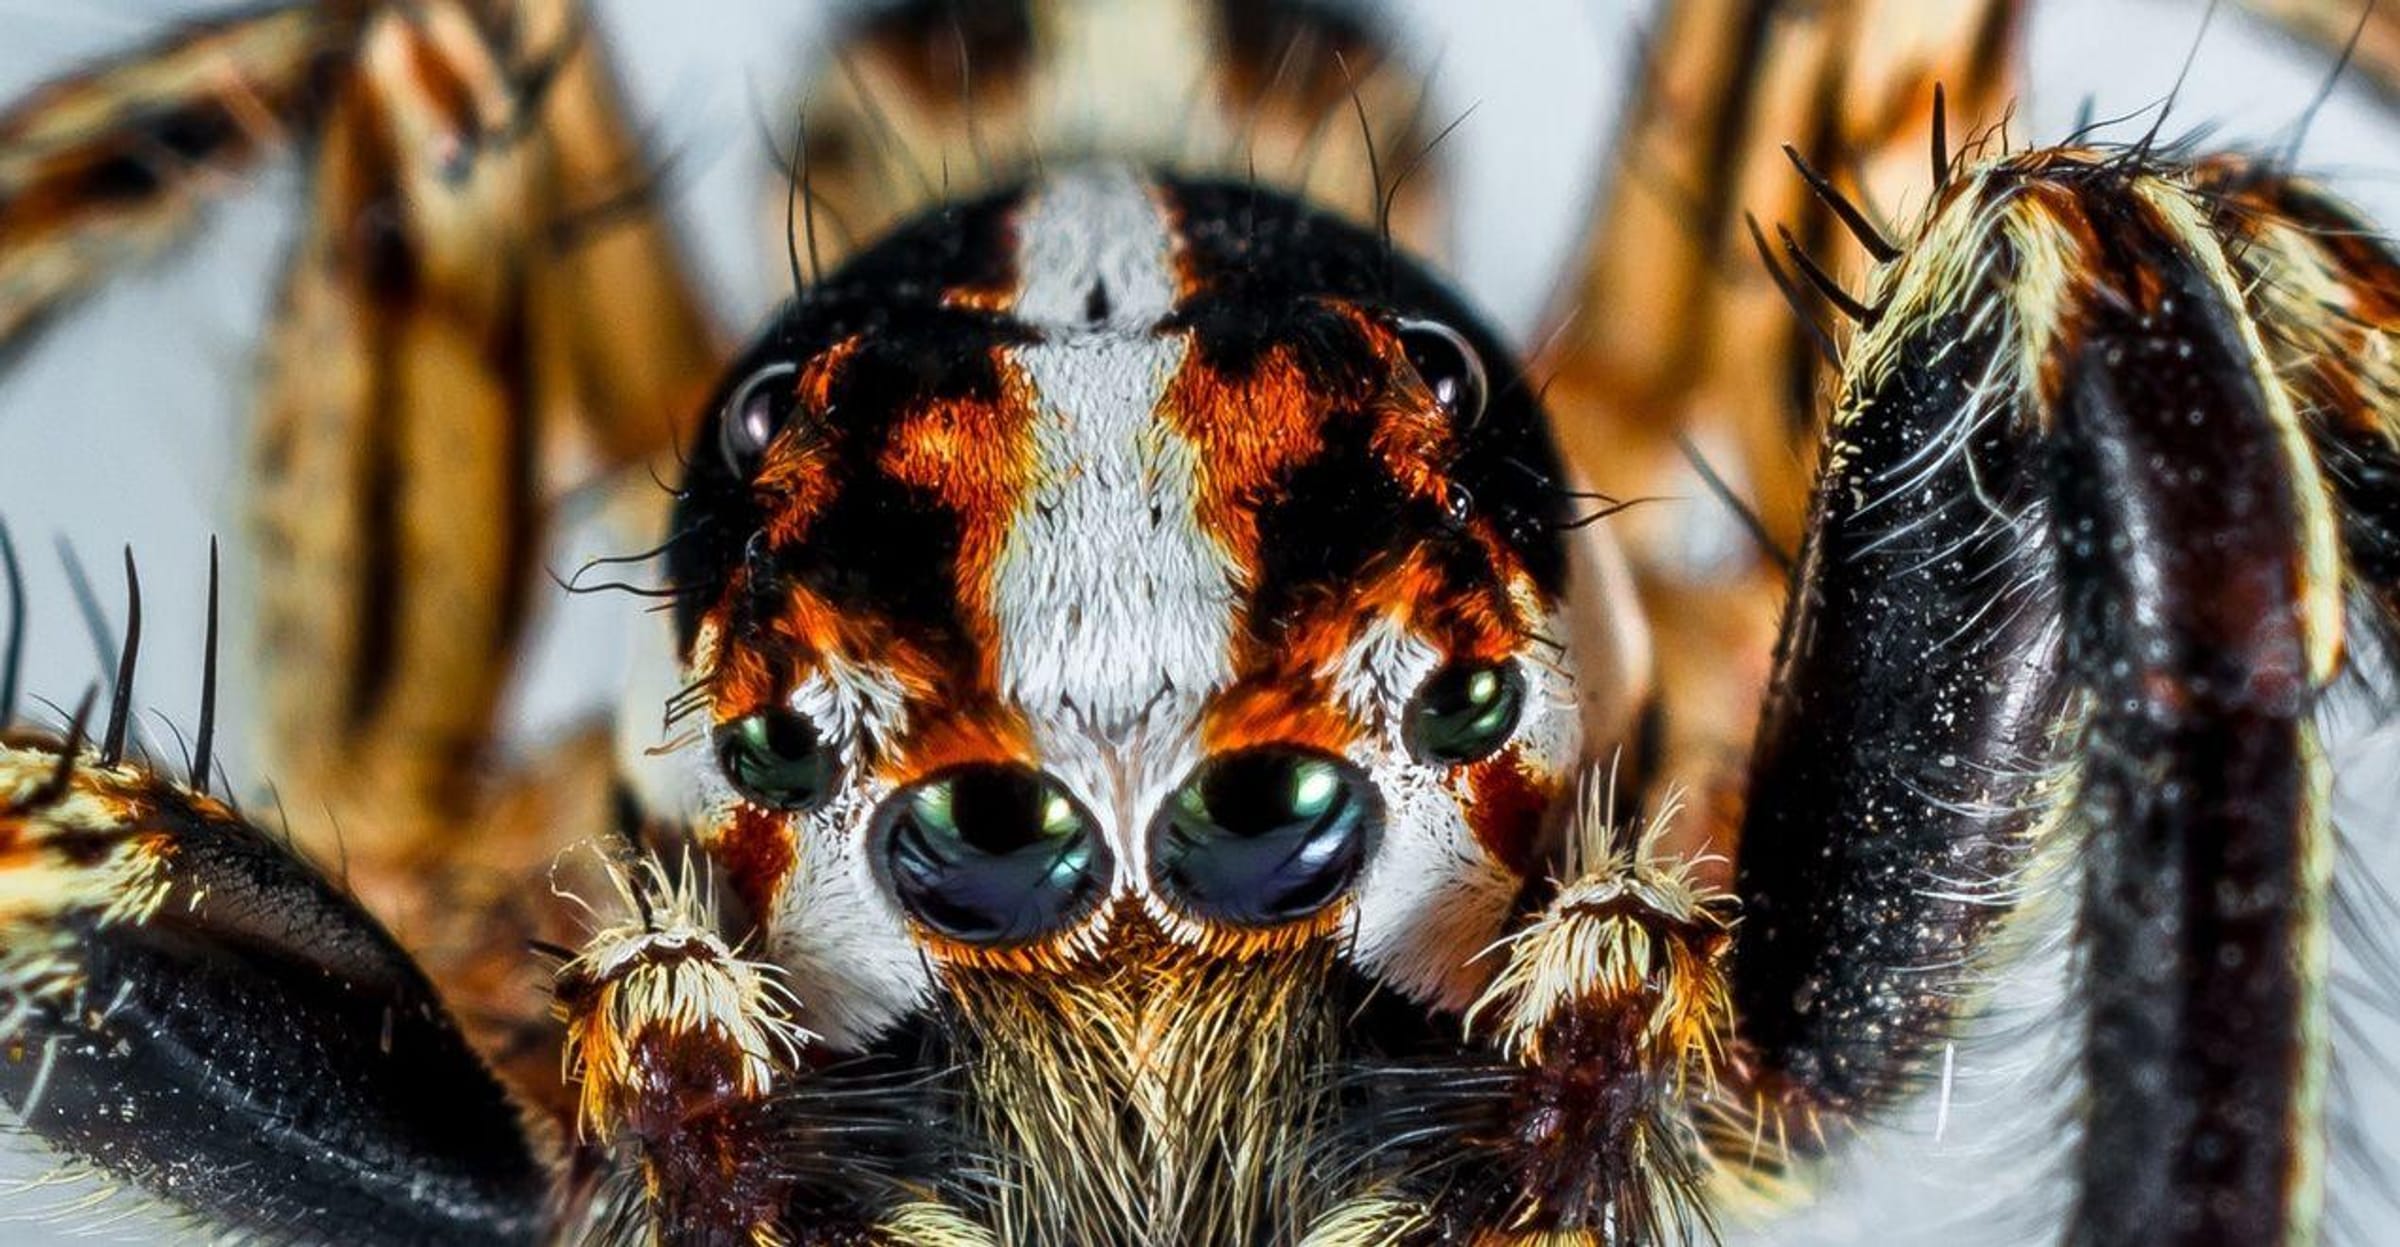 Texas Has Two Spiders That Can Straight Up Kill You